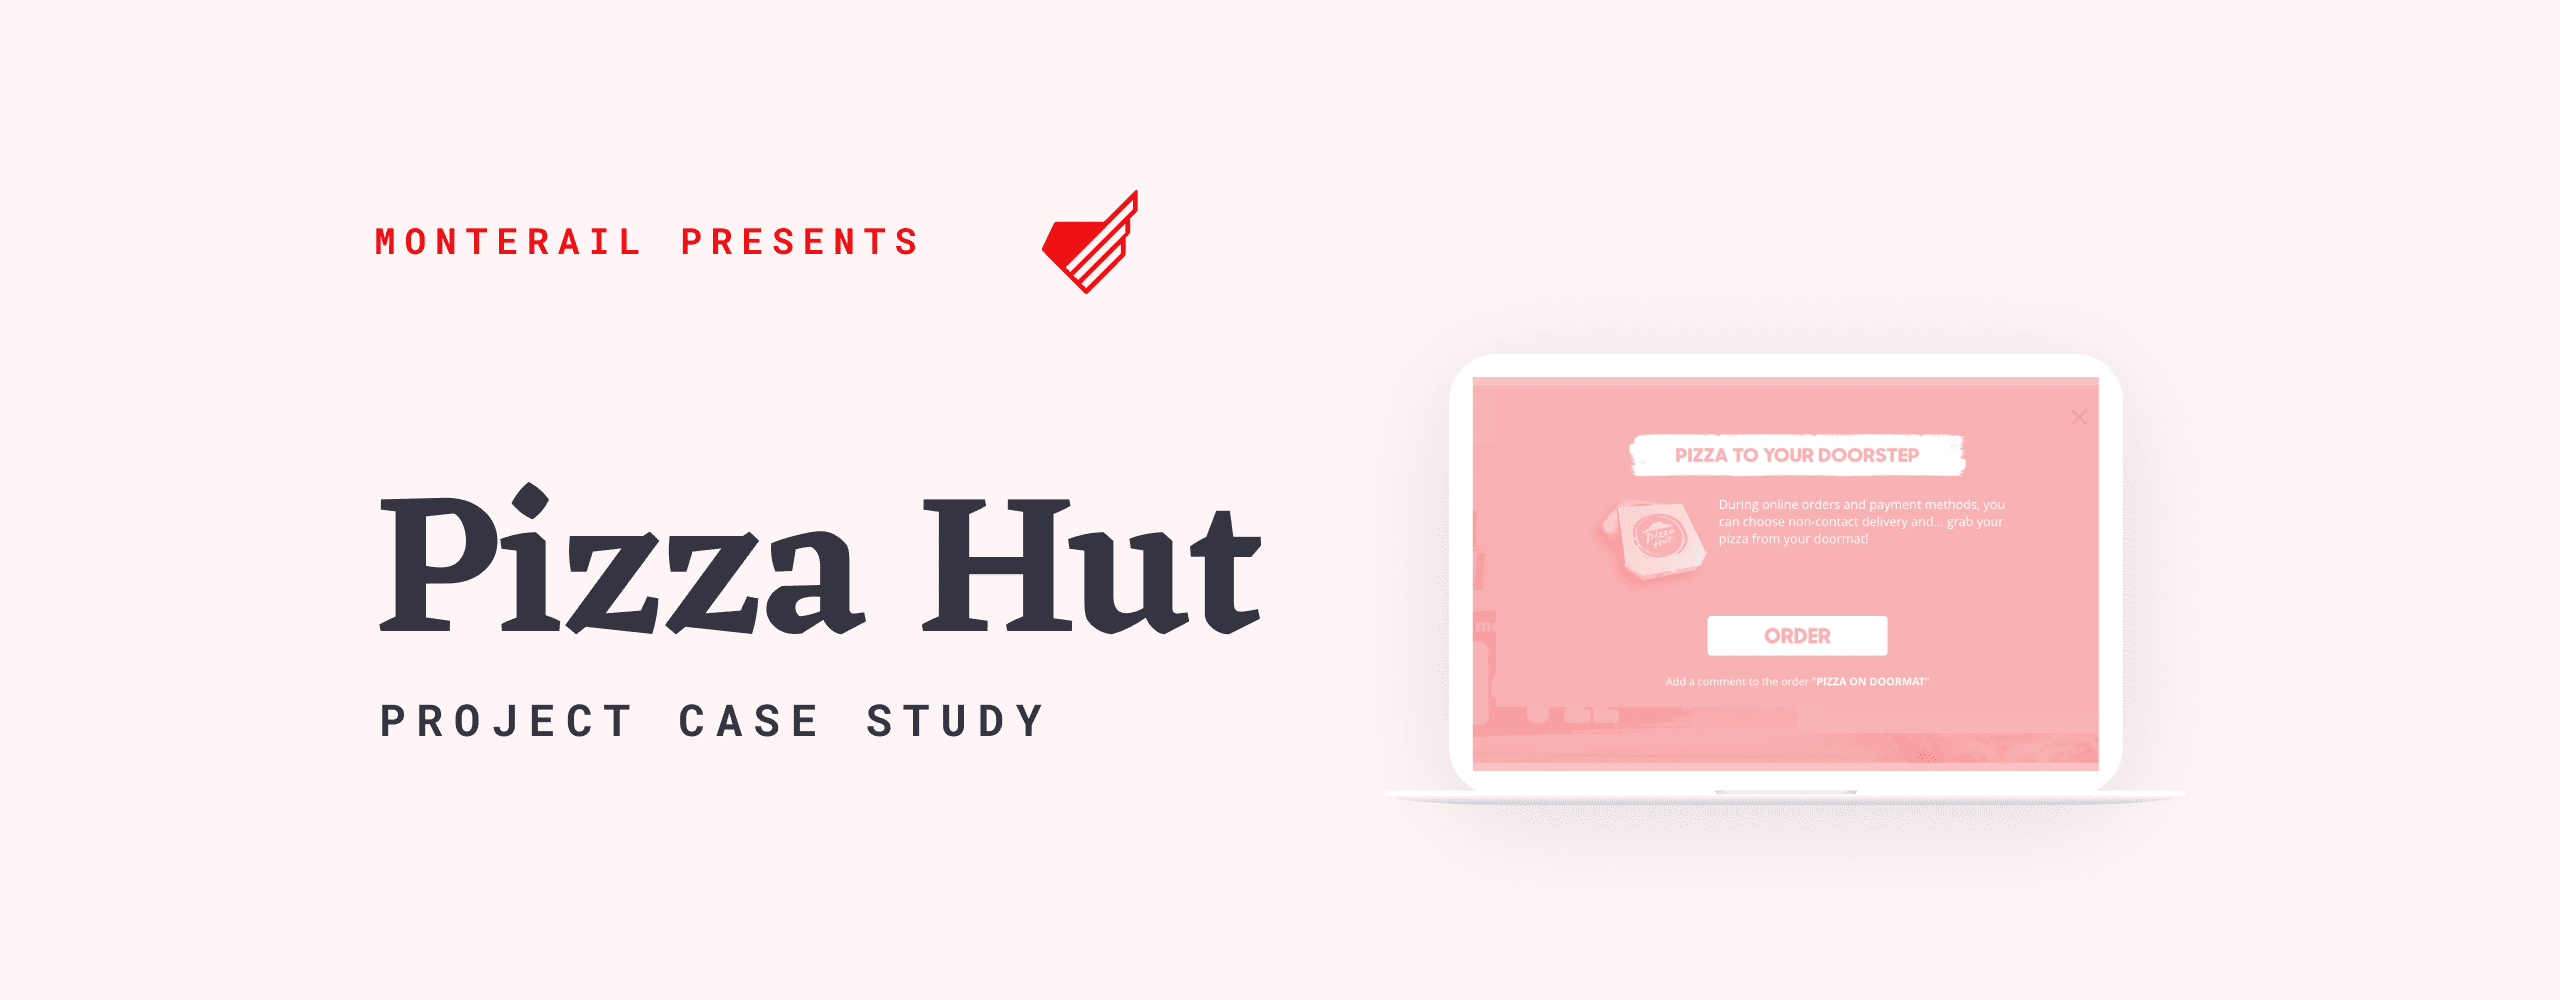 Pizza Hut Case Study: Introducing Contact-Free Delivery In Less Than 5 Hours